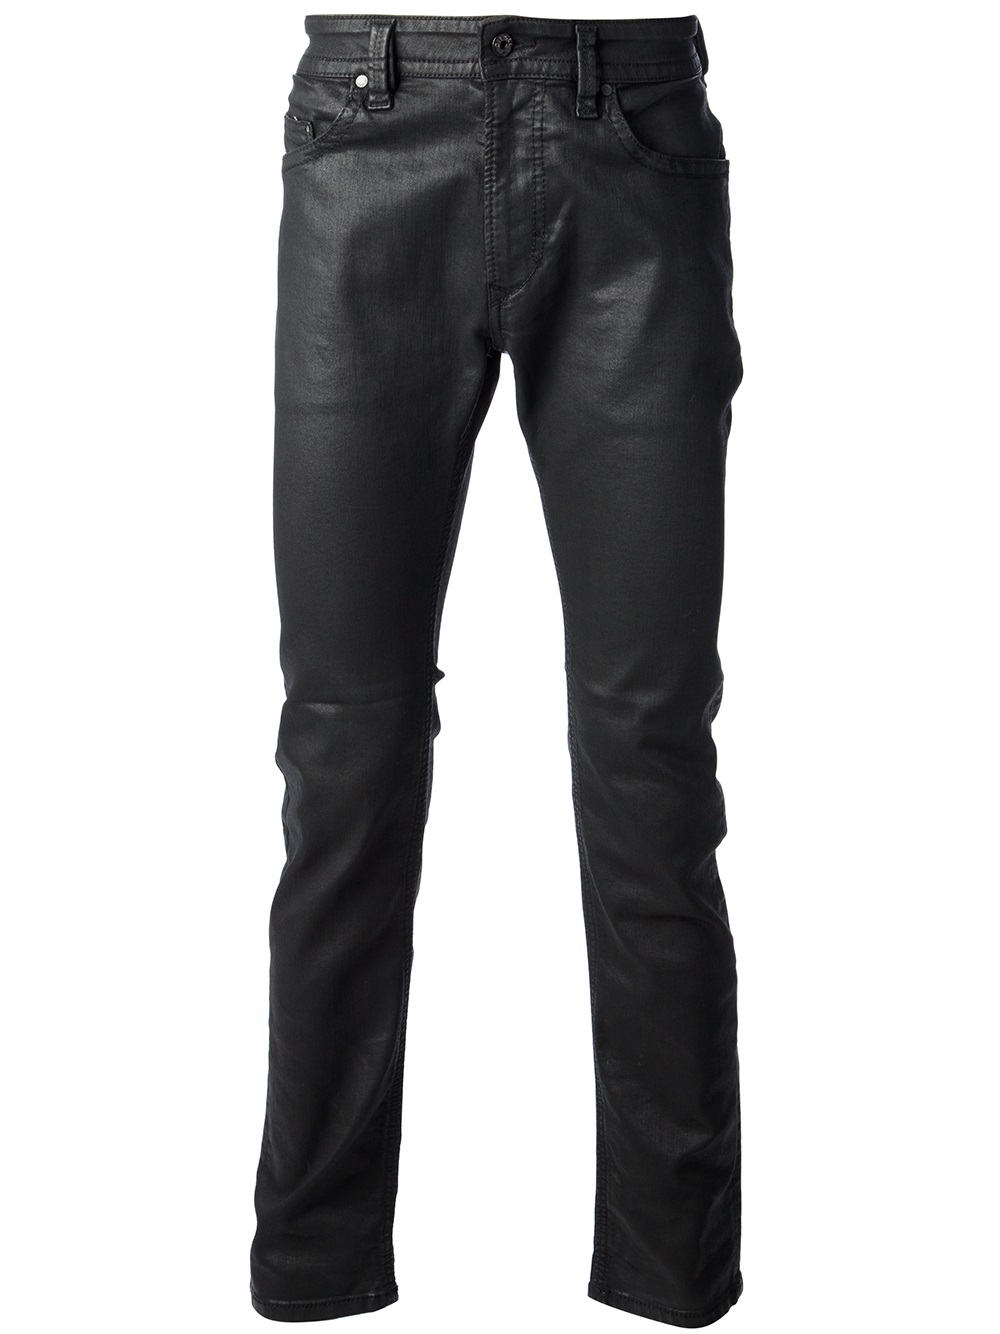 New Low Moq Classic Stretch Flared Jeans Black Waxed Coated Denim For Men's  Buy Flared Denim For Men's,Waxed Denim For Men's,Low Moq Denim For Men's |  thepadoctor.com